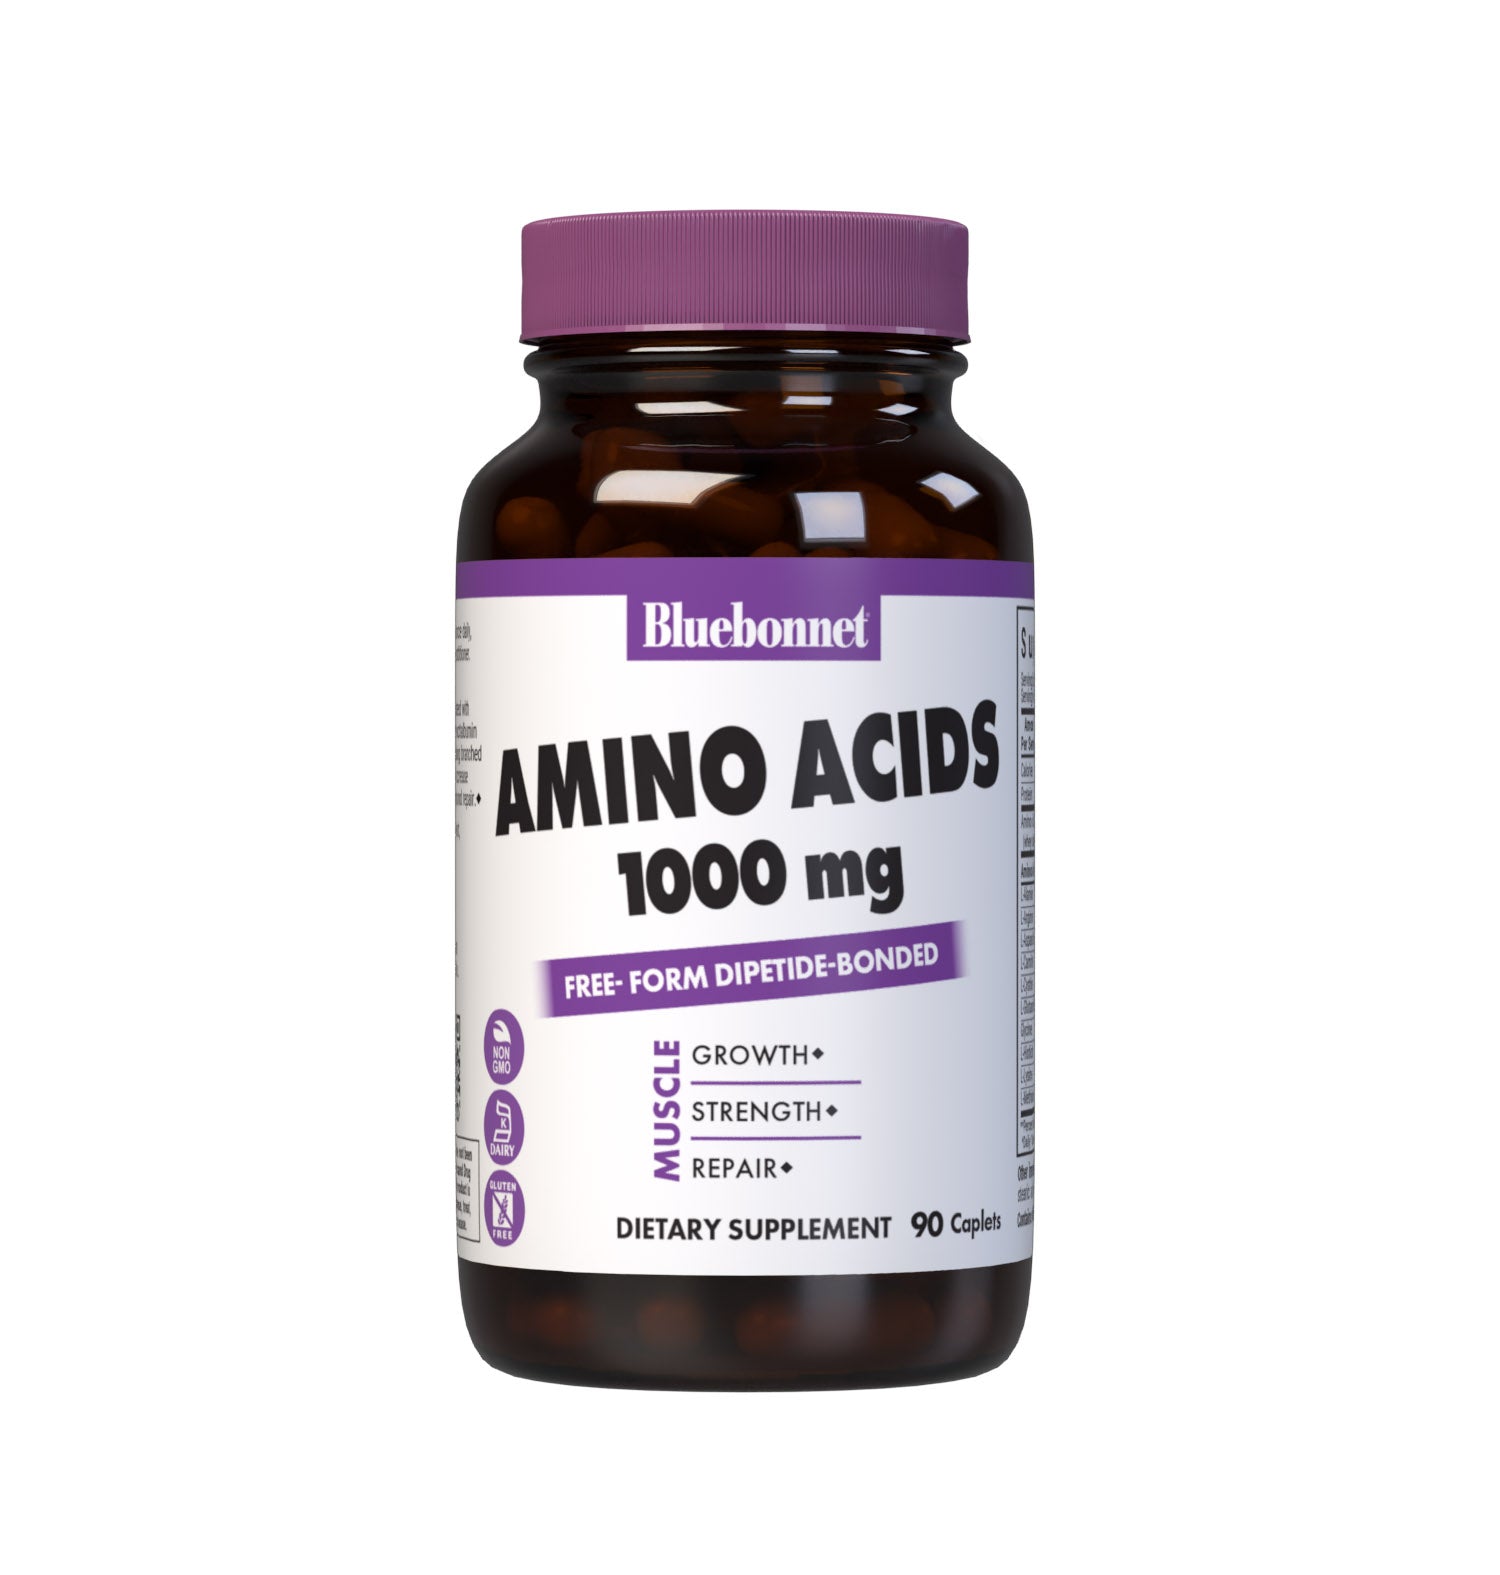 Bluebonnet’s Amino Acids 1000 mg 90 Caplets are formulated with free-form and dipeptide-bonded, amino acids from whey lactalbumin and egg white albumin proteins that are rich in muscle-building branched chain amino acids (BCAAs). These amino acids help to increase nitrogen retention for enhanced muscle growth, strength and repair. #size_90 count